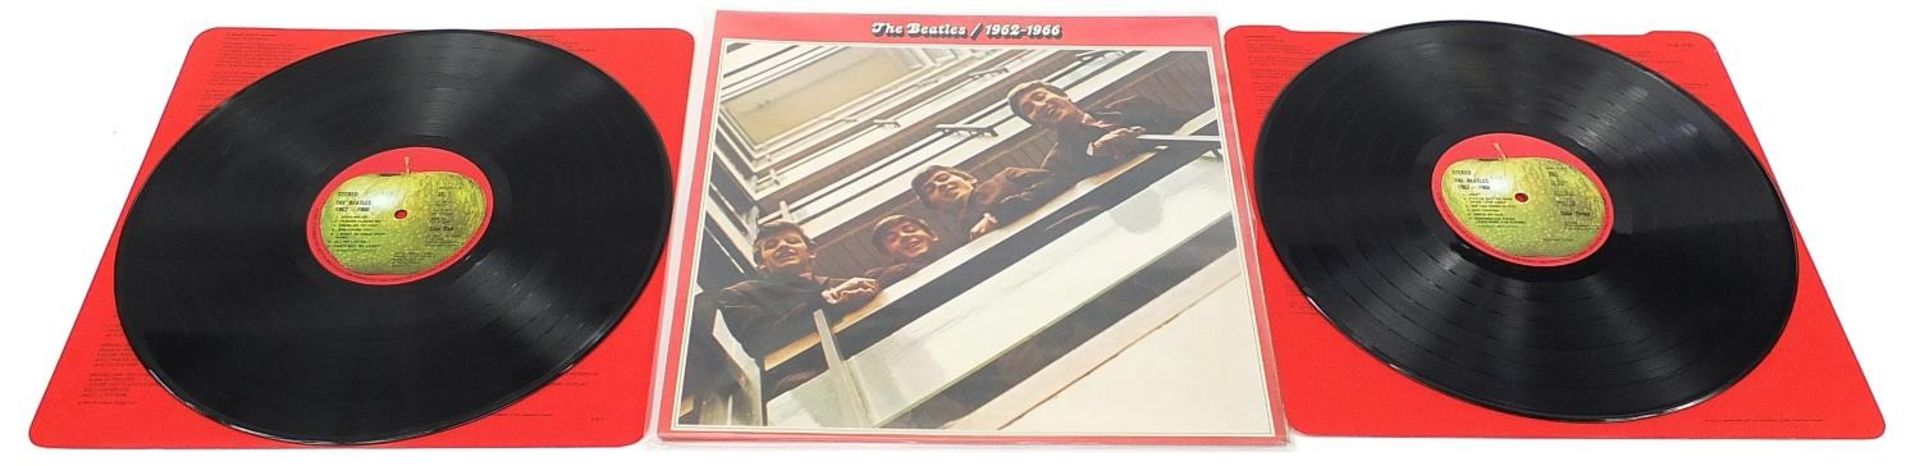 Nine The Beatles 1962-1966 vinyl LP records including Special Double Album set and red vinyl - Image 4 of 20